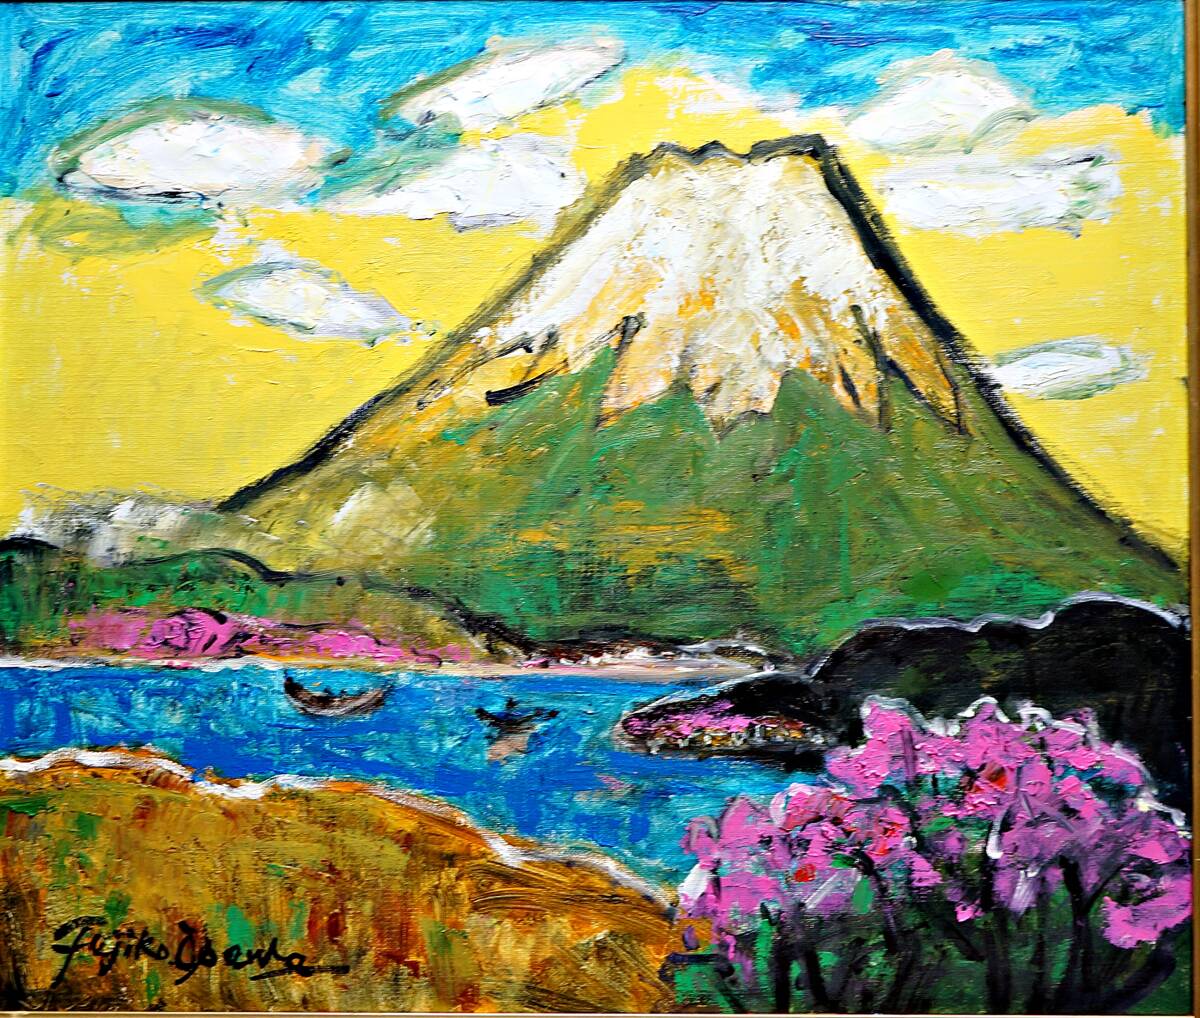 FUJIKO■Fuji■Large size F10■Authenticity guaranteed (work certificate included)■Newly framed (brown color)■Oil painting, painting, oil painting, Nature, Landscape painting